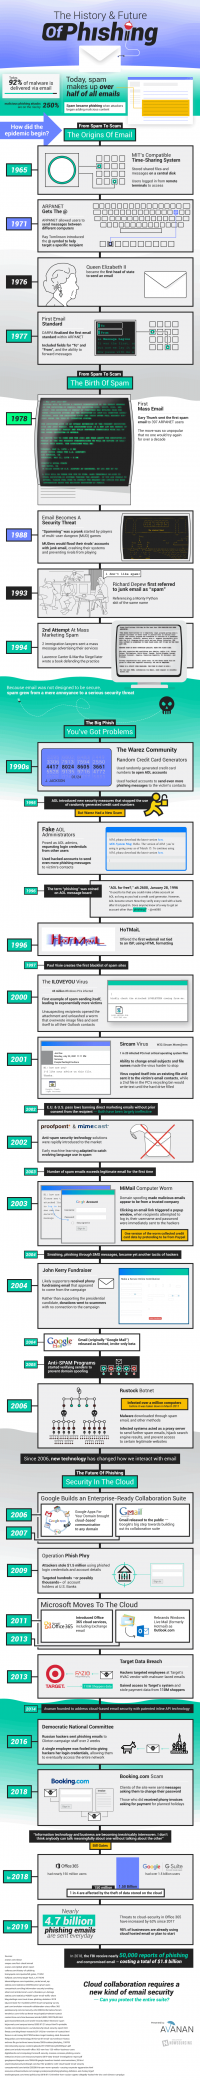 The History of Phishing and Email Security [Infographic]